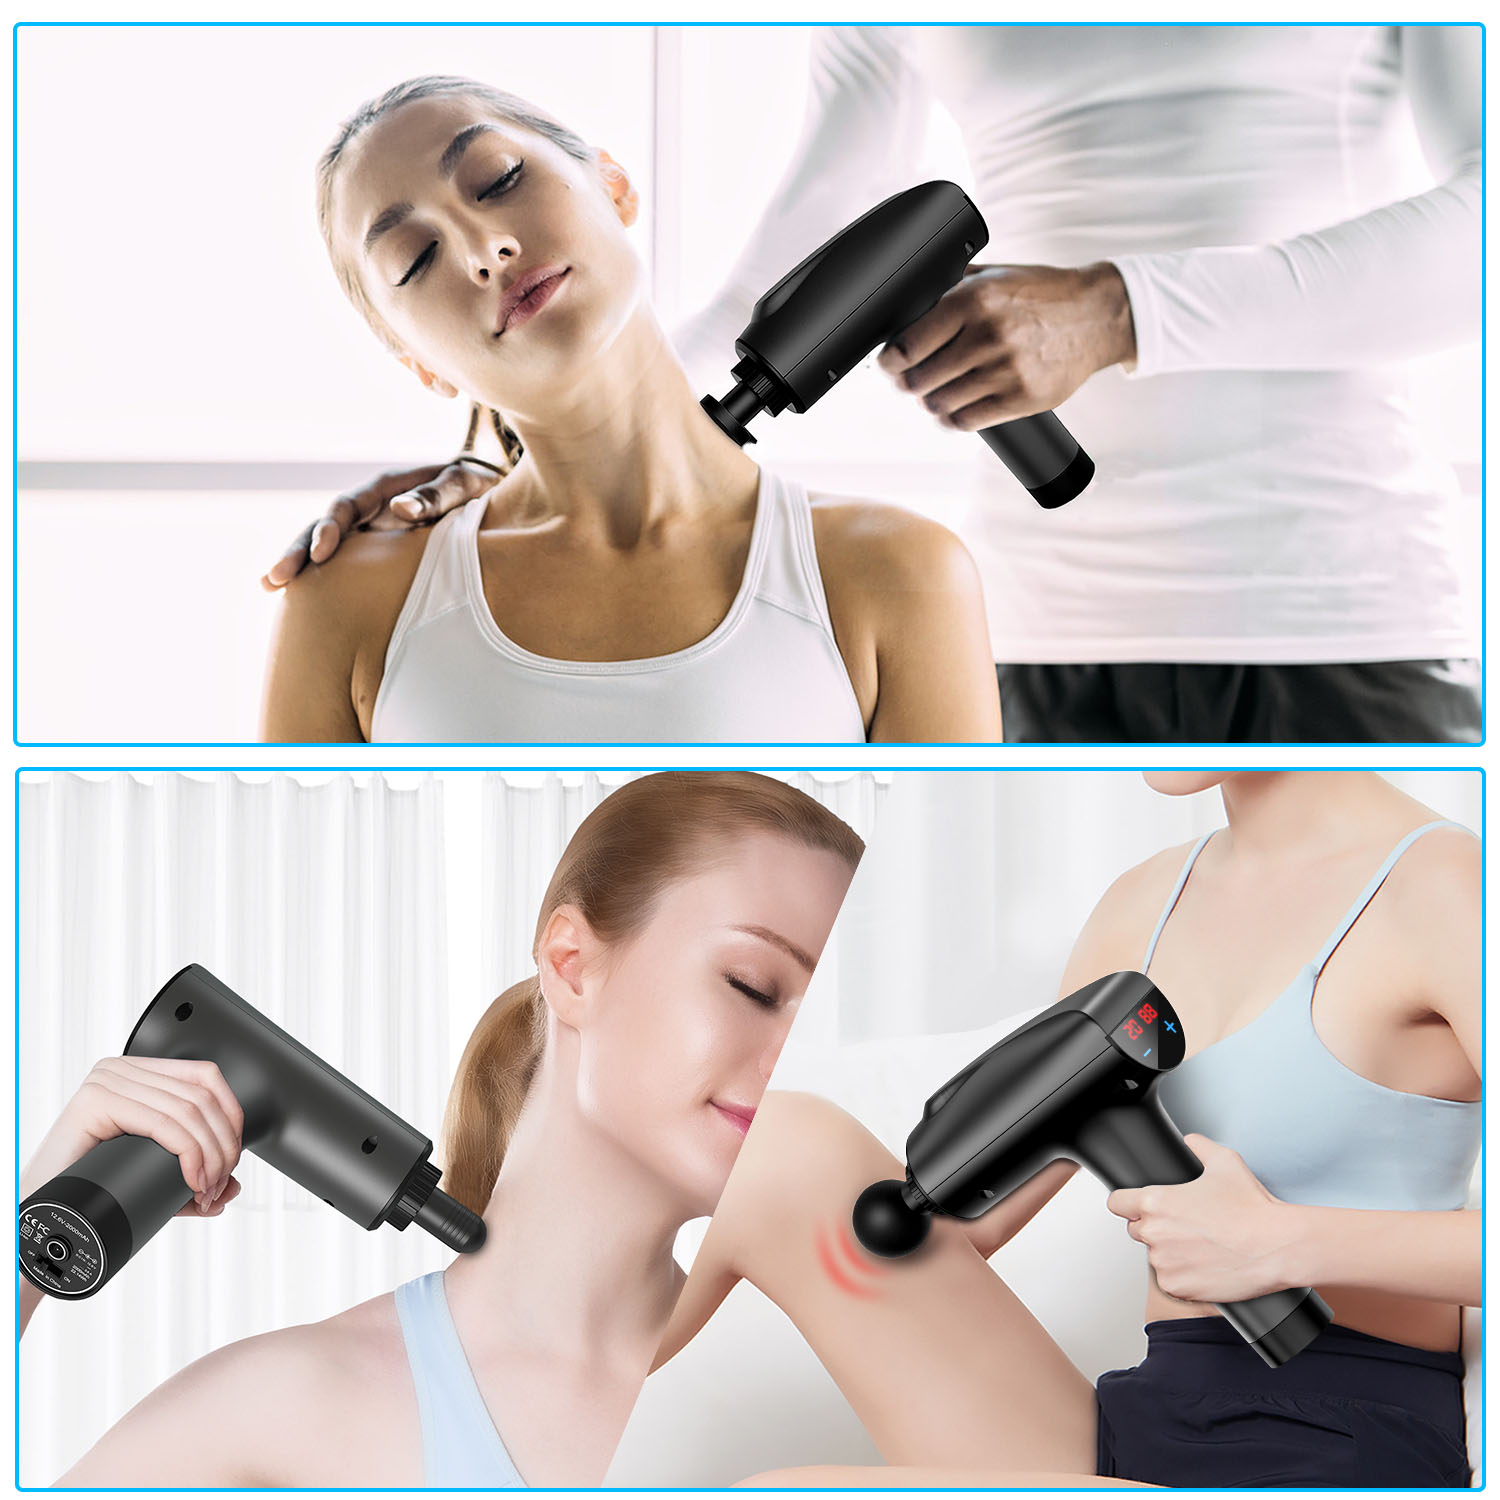 99 Speed Muscle Massage Gun, Deep Tissue Muscle Massager for Pain Relief, Handheld Electric Body Massager Sports Drill Portable Super Quiet Brushless Motor - image 3 of 7